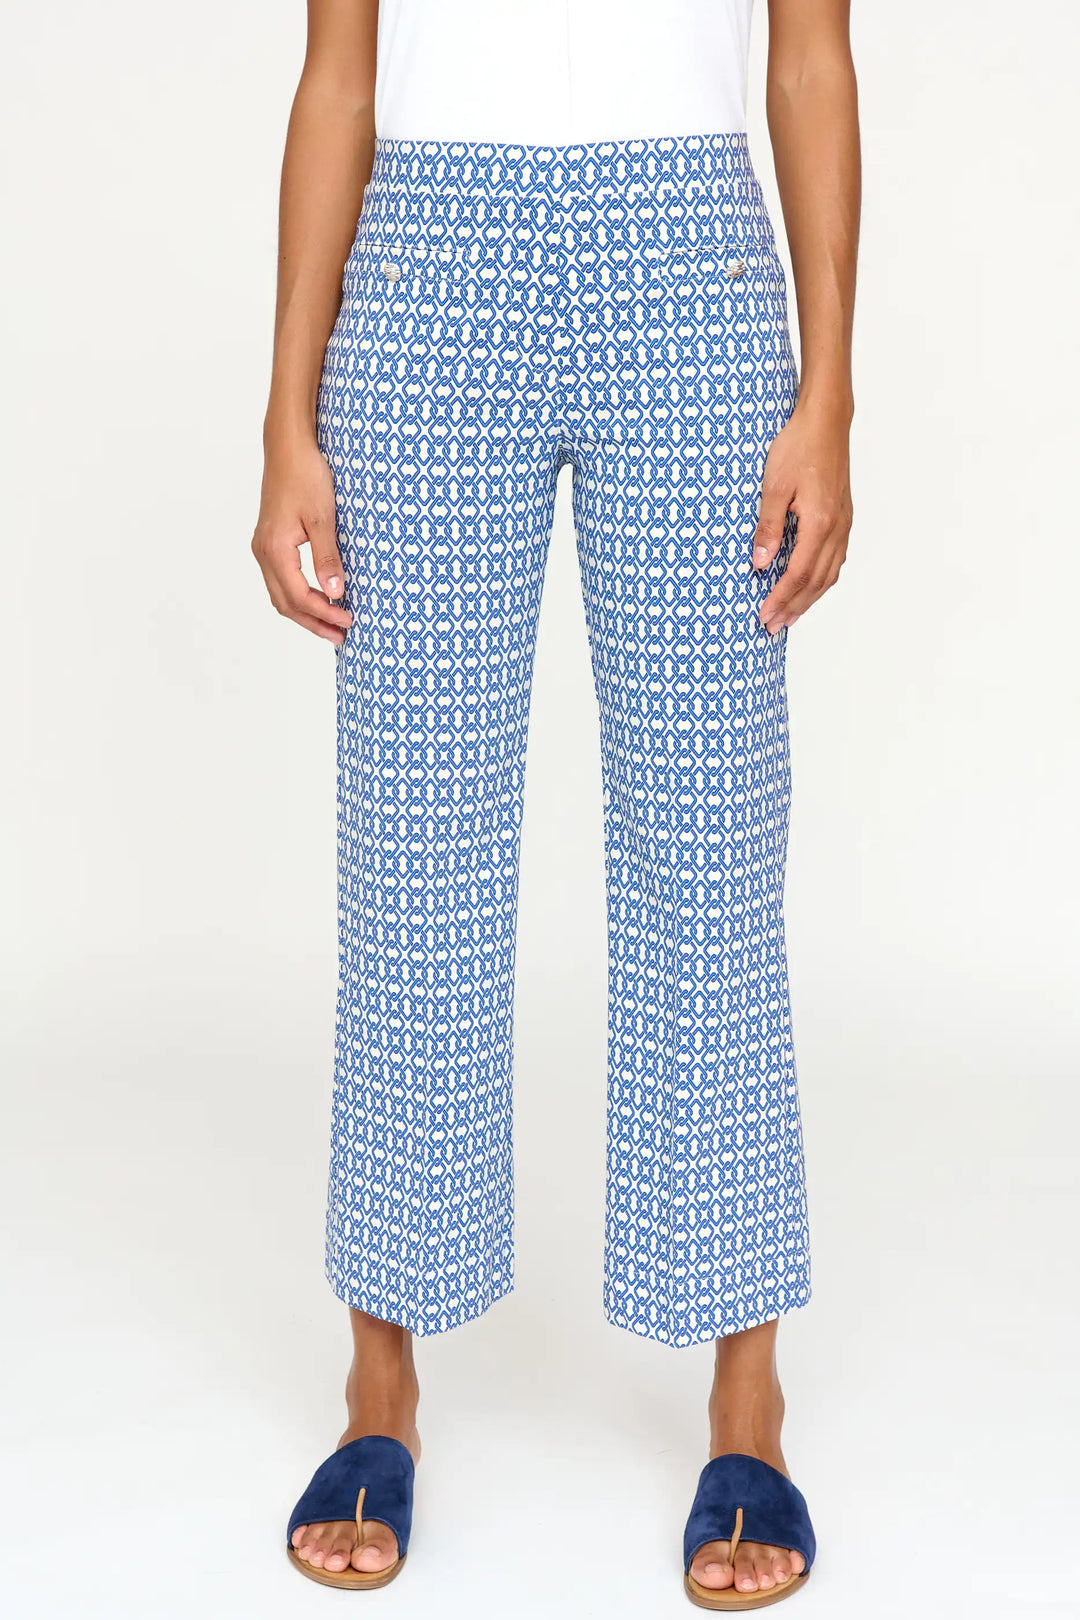 Front view of 'Dariana' style pants featuring a detailed blue and white porcelain-like pattern, mid-rise waist, and cropped straight-leg fit, paired with dark blue slide sandals.